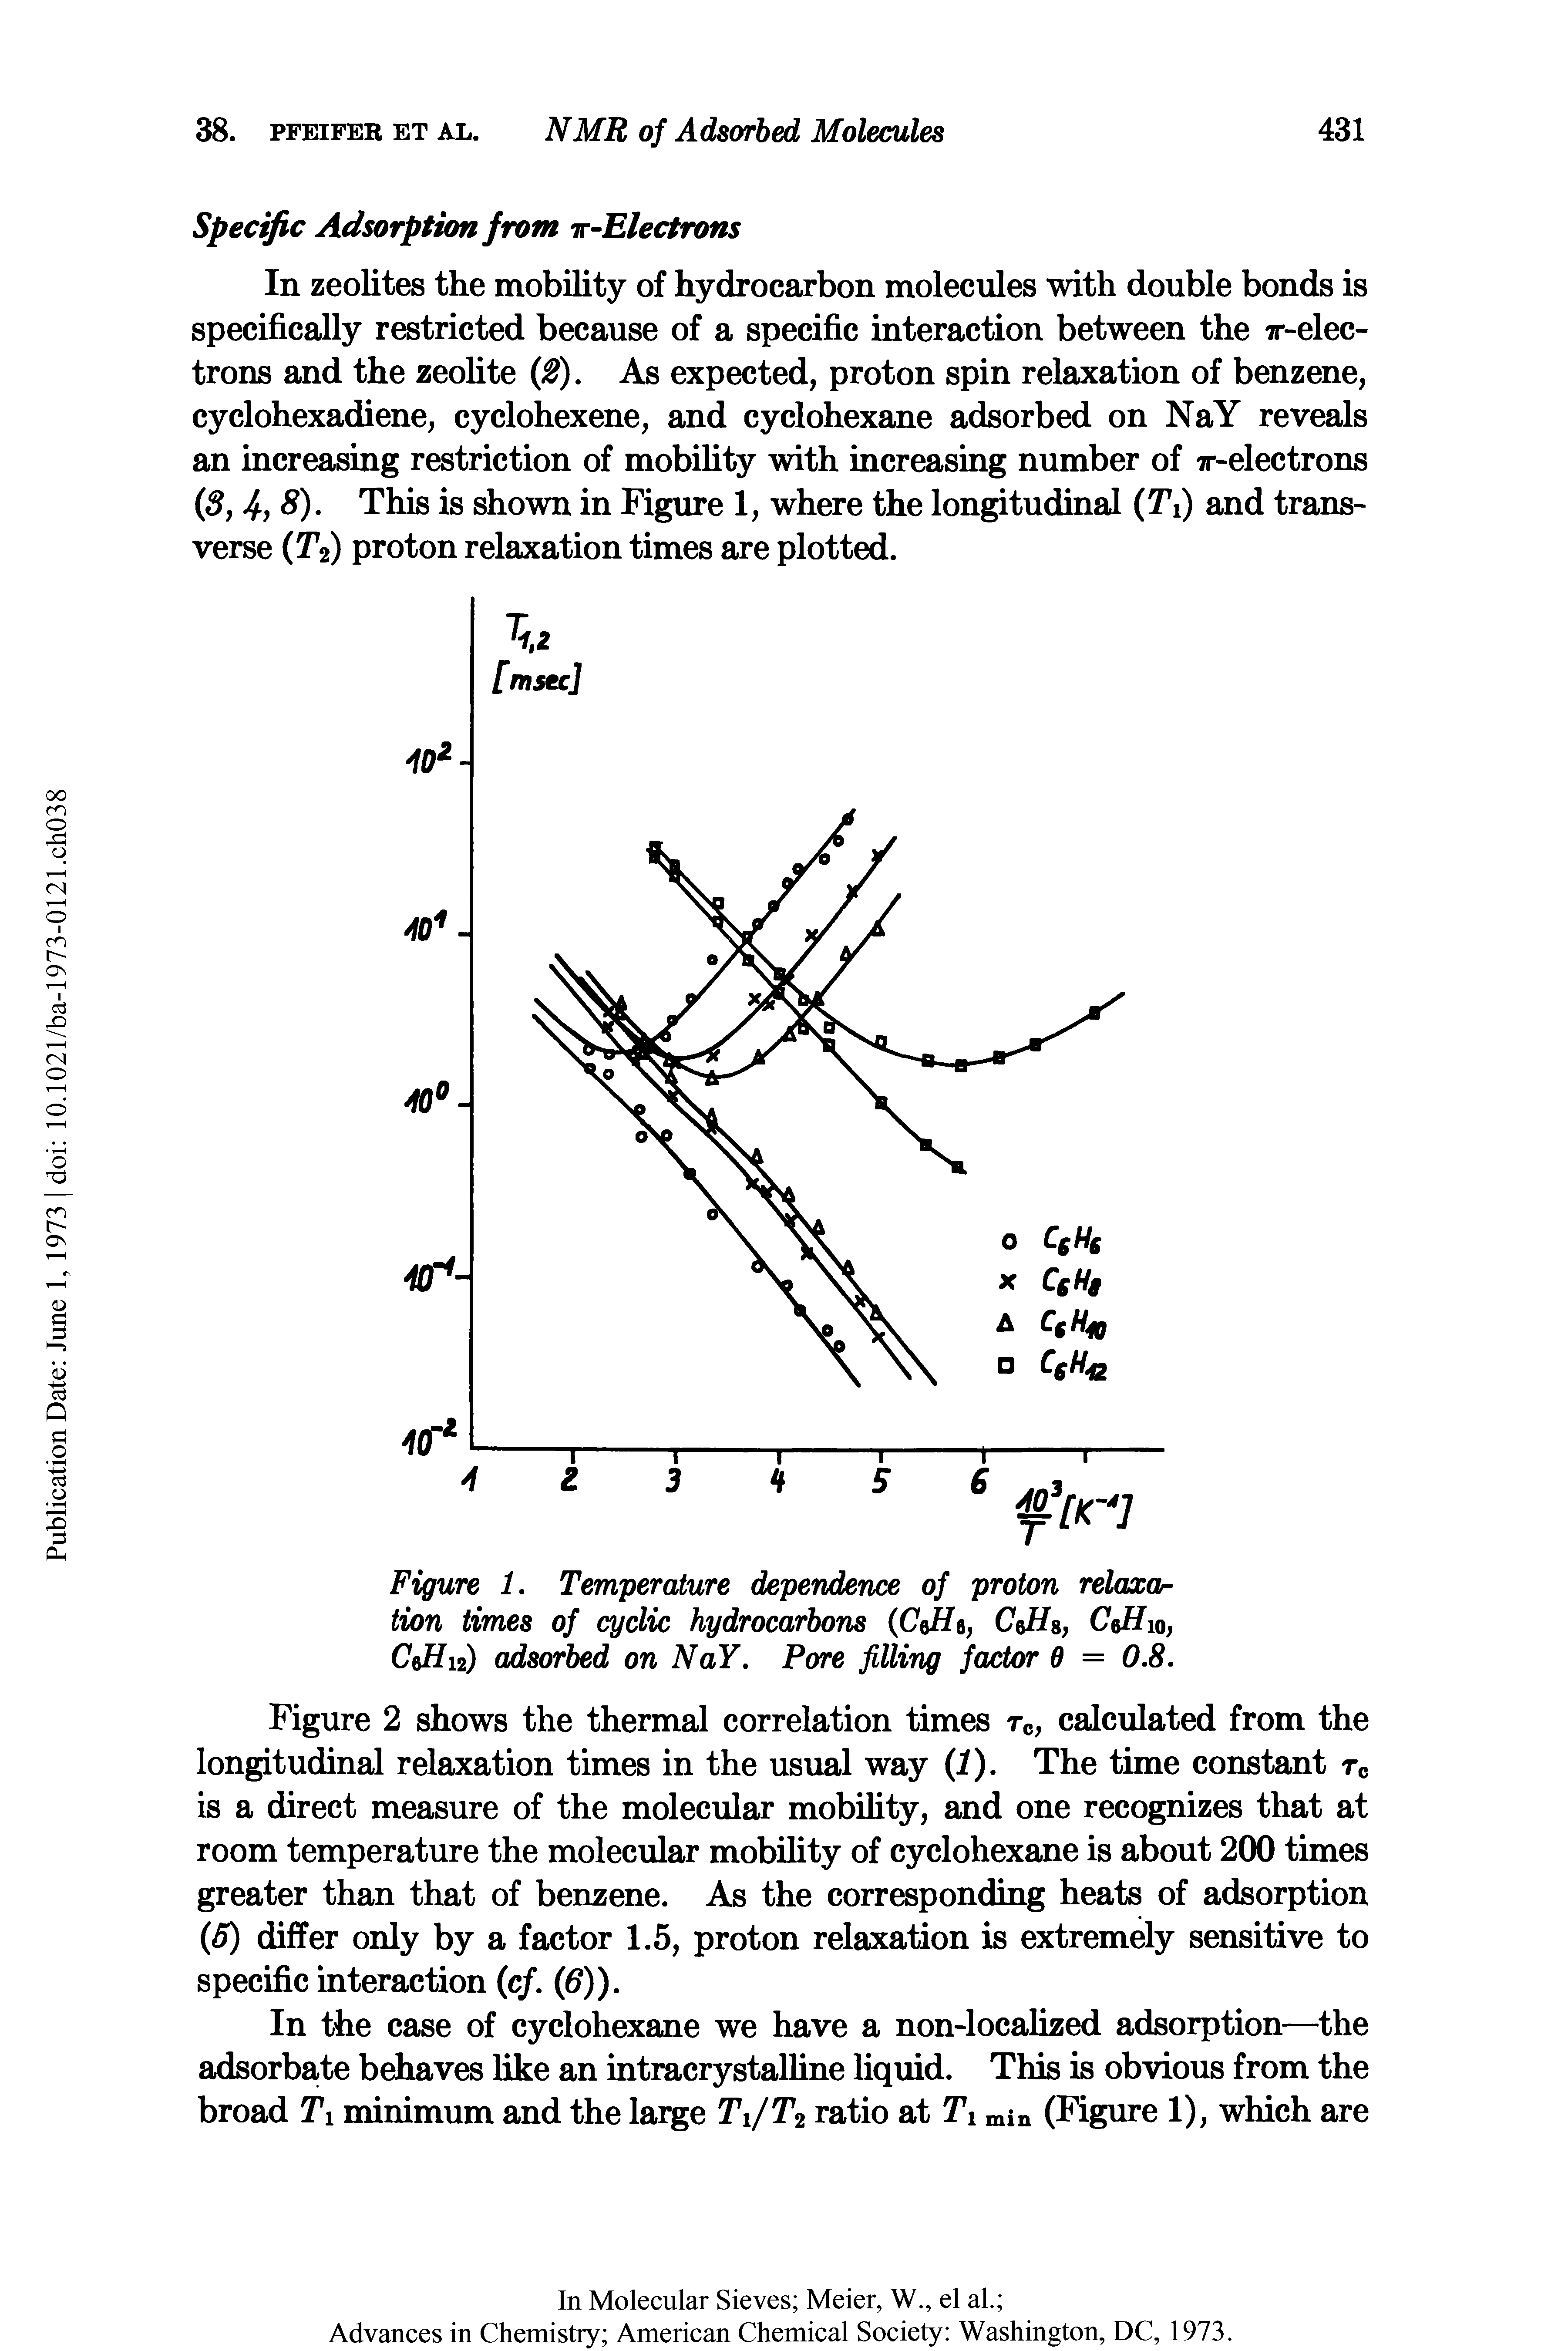 Figure 1. Temperature dependence of proton relaxation times of cyclic hydrocarbons (C Ht, C Hs, C flio, CqHi2) adsorbed on NaY. Pore filling factor 0 = 0.8.